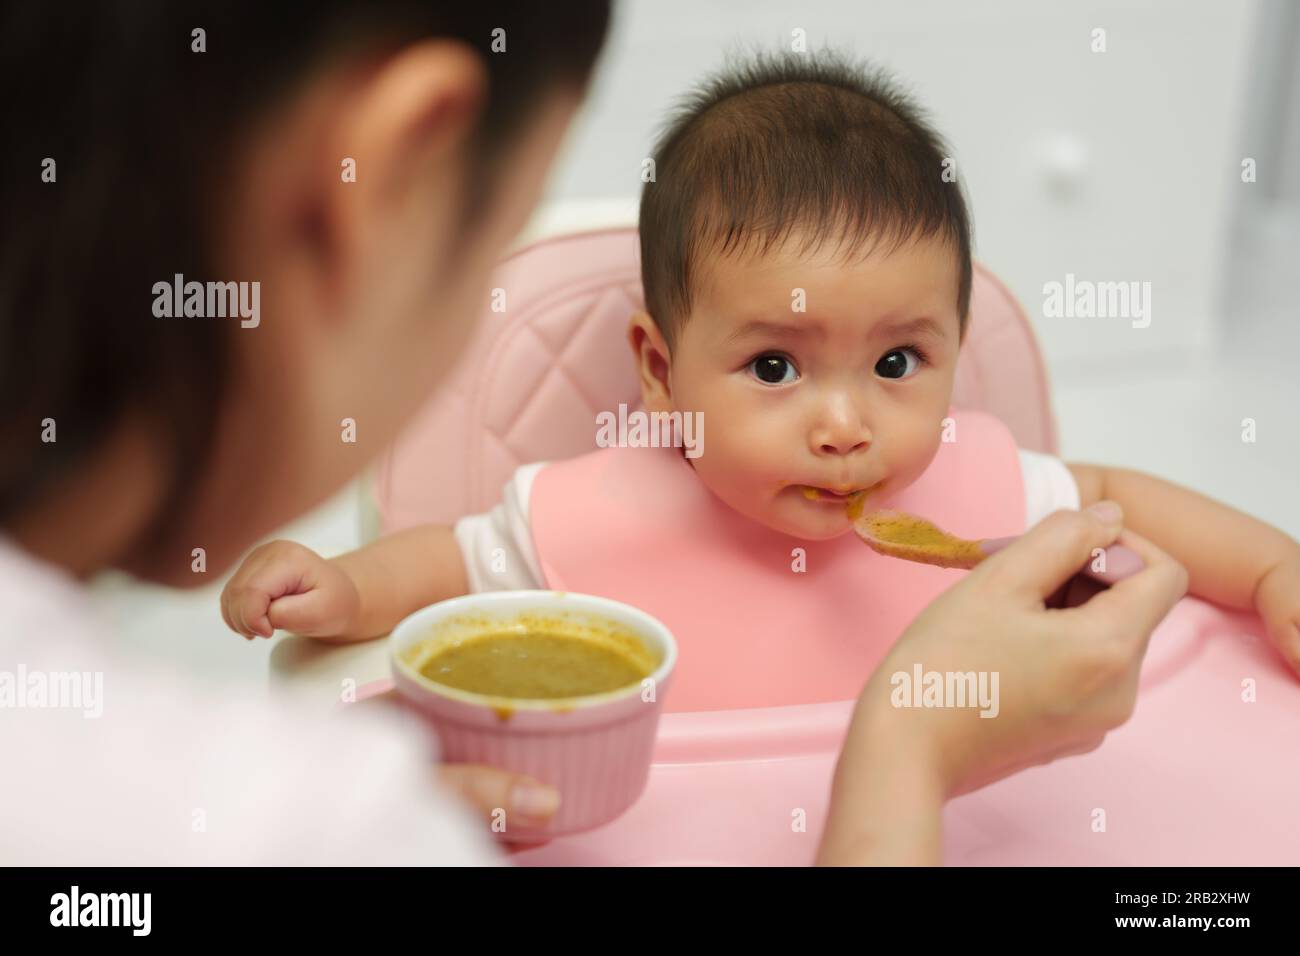 mother feeding food to her infant baby eating with a spoon at home Stock Photo